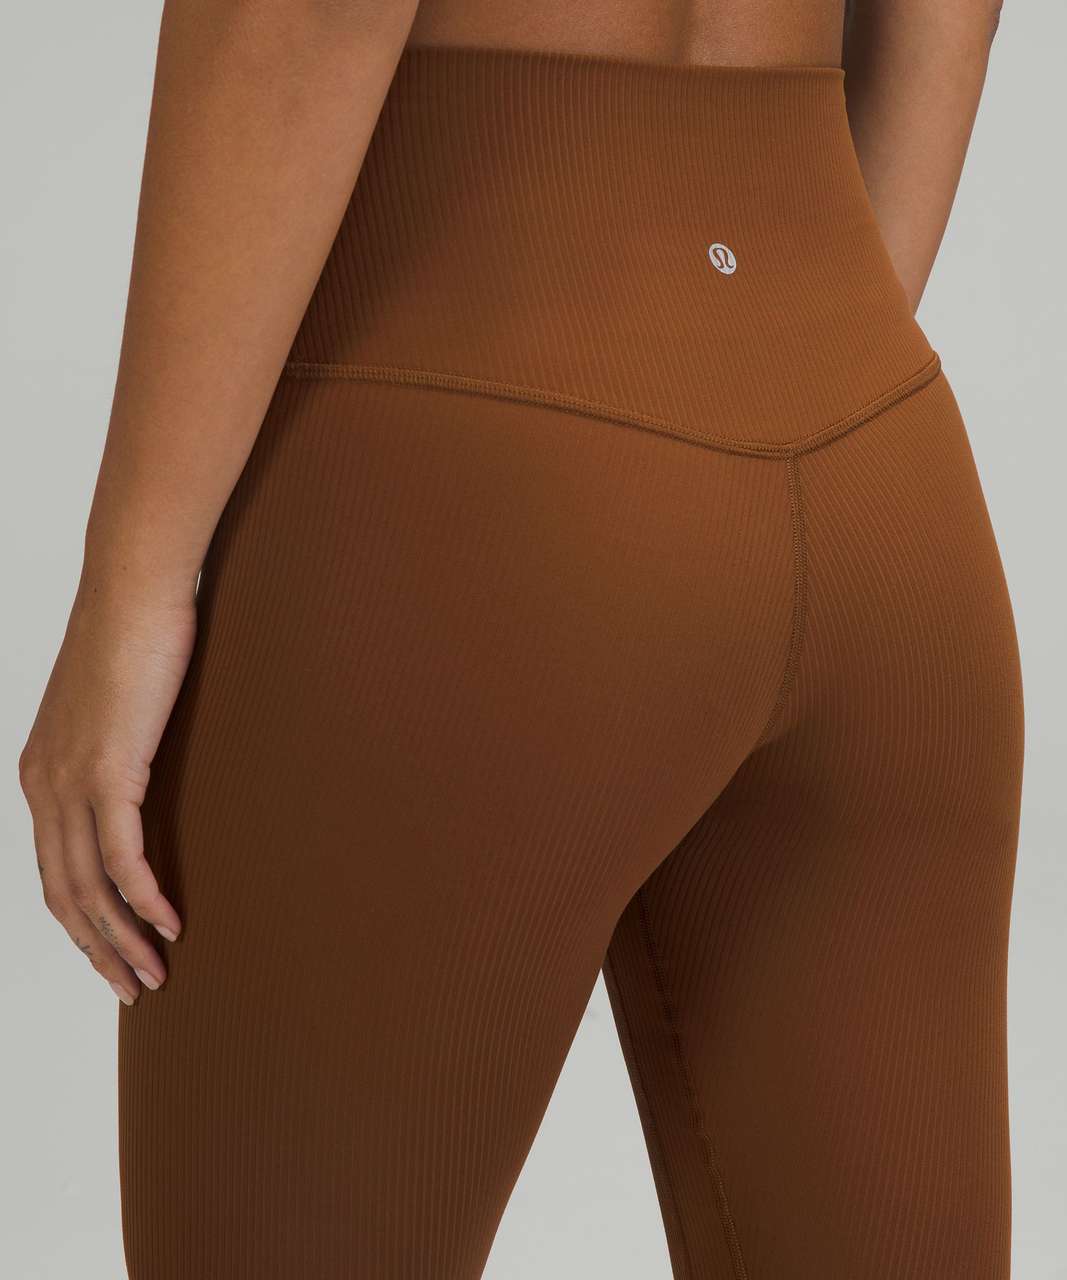 Lululemon Align Ribbed High-Rise Pant 25" - Roasted Brown